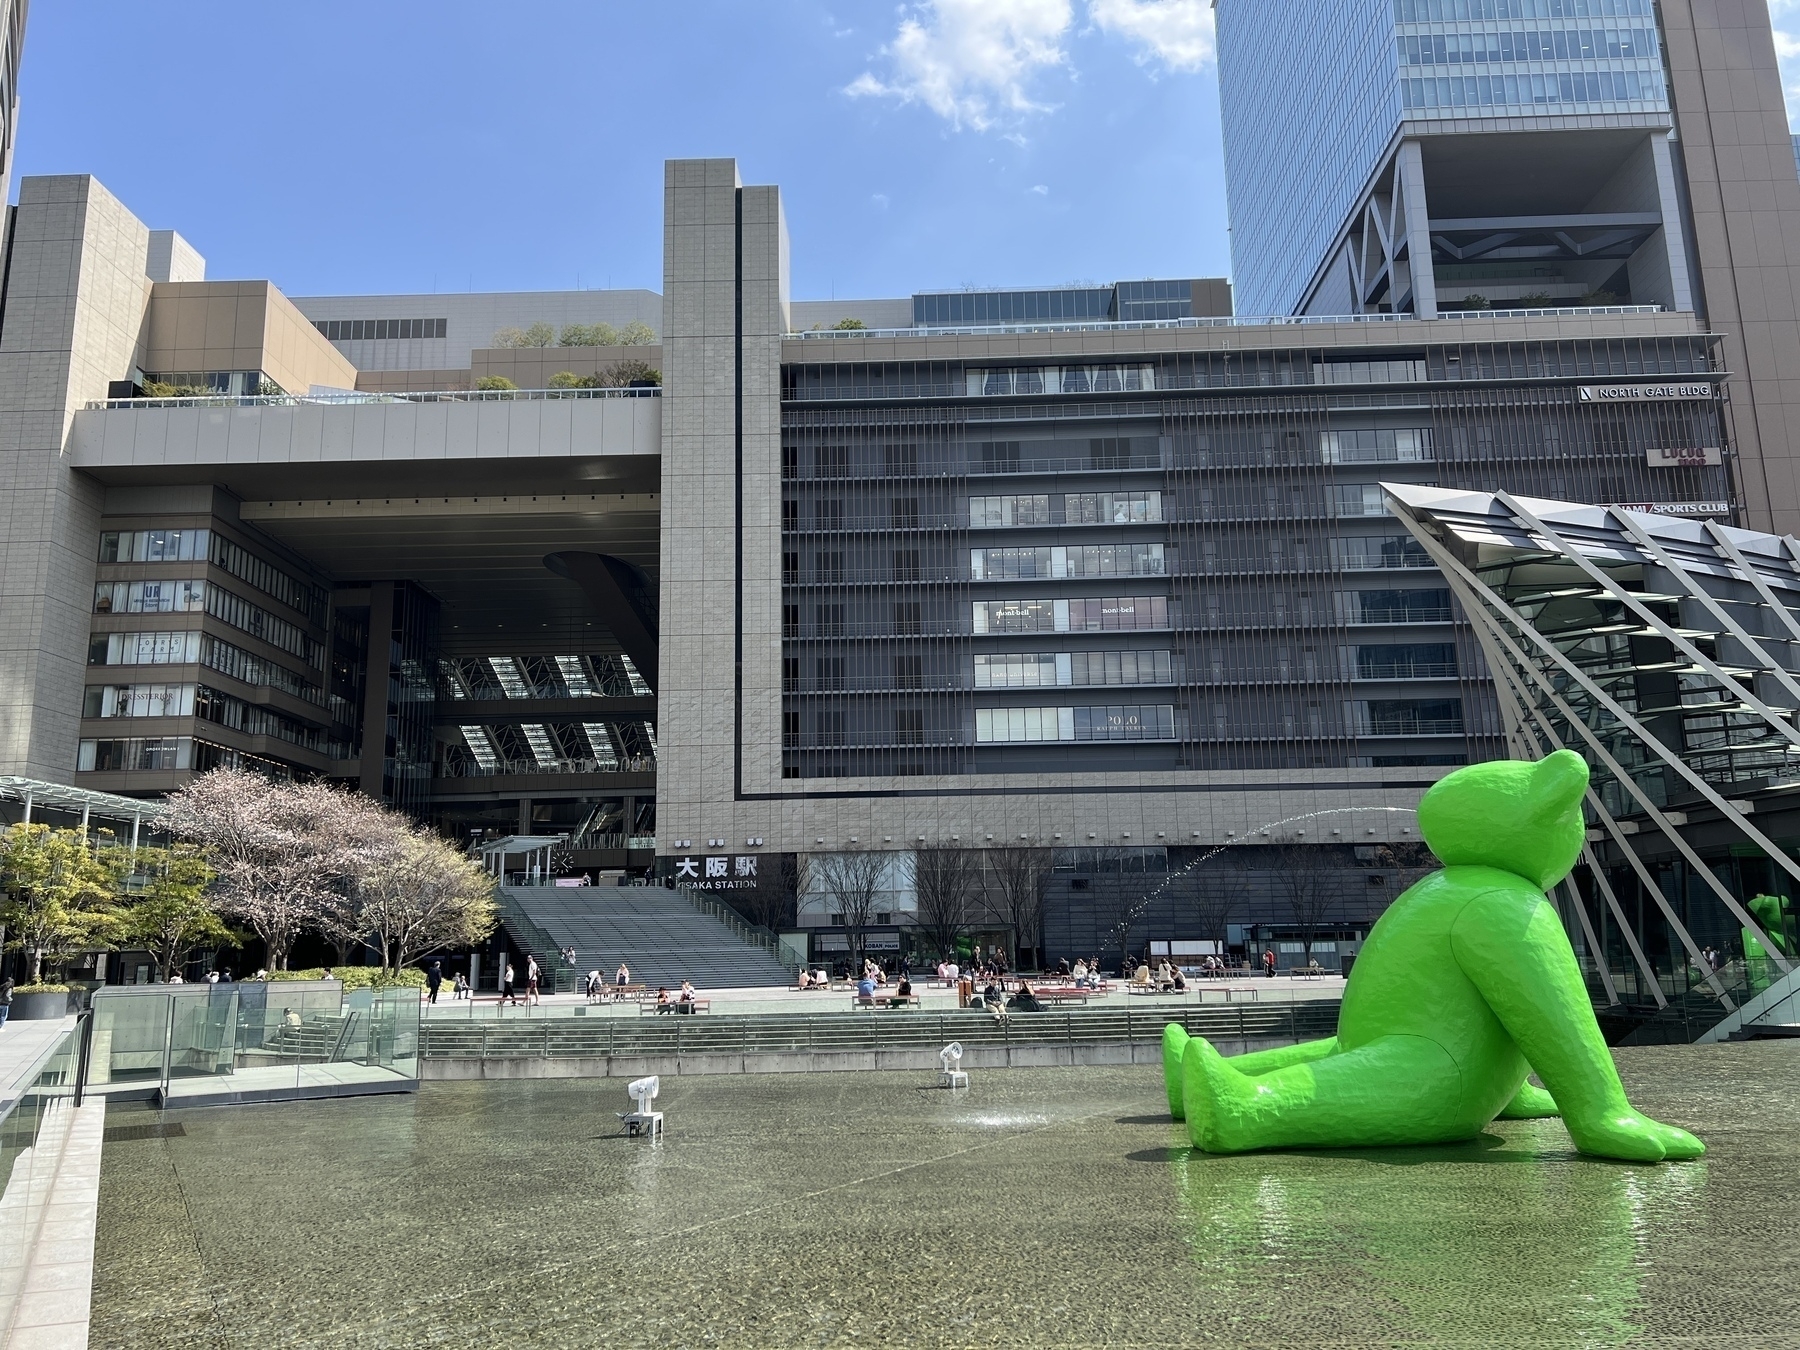 The green Teddy Bear fountain called Ted Hyber, a sculpture by Fabrice Hybert. In background is the Osaka Station Building